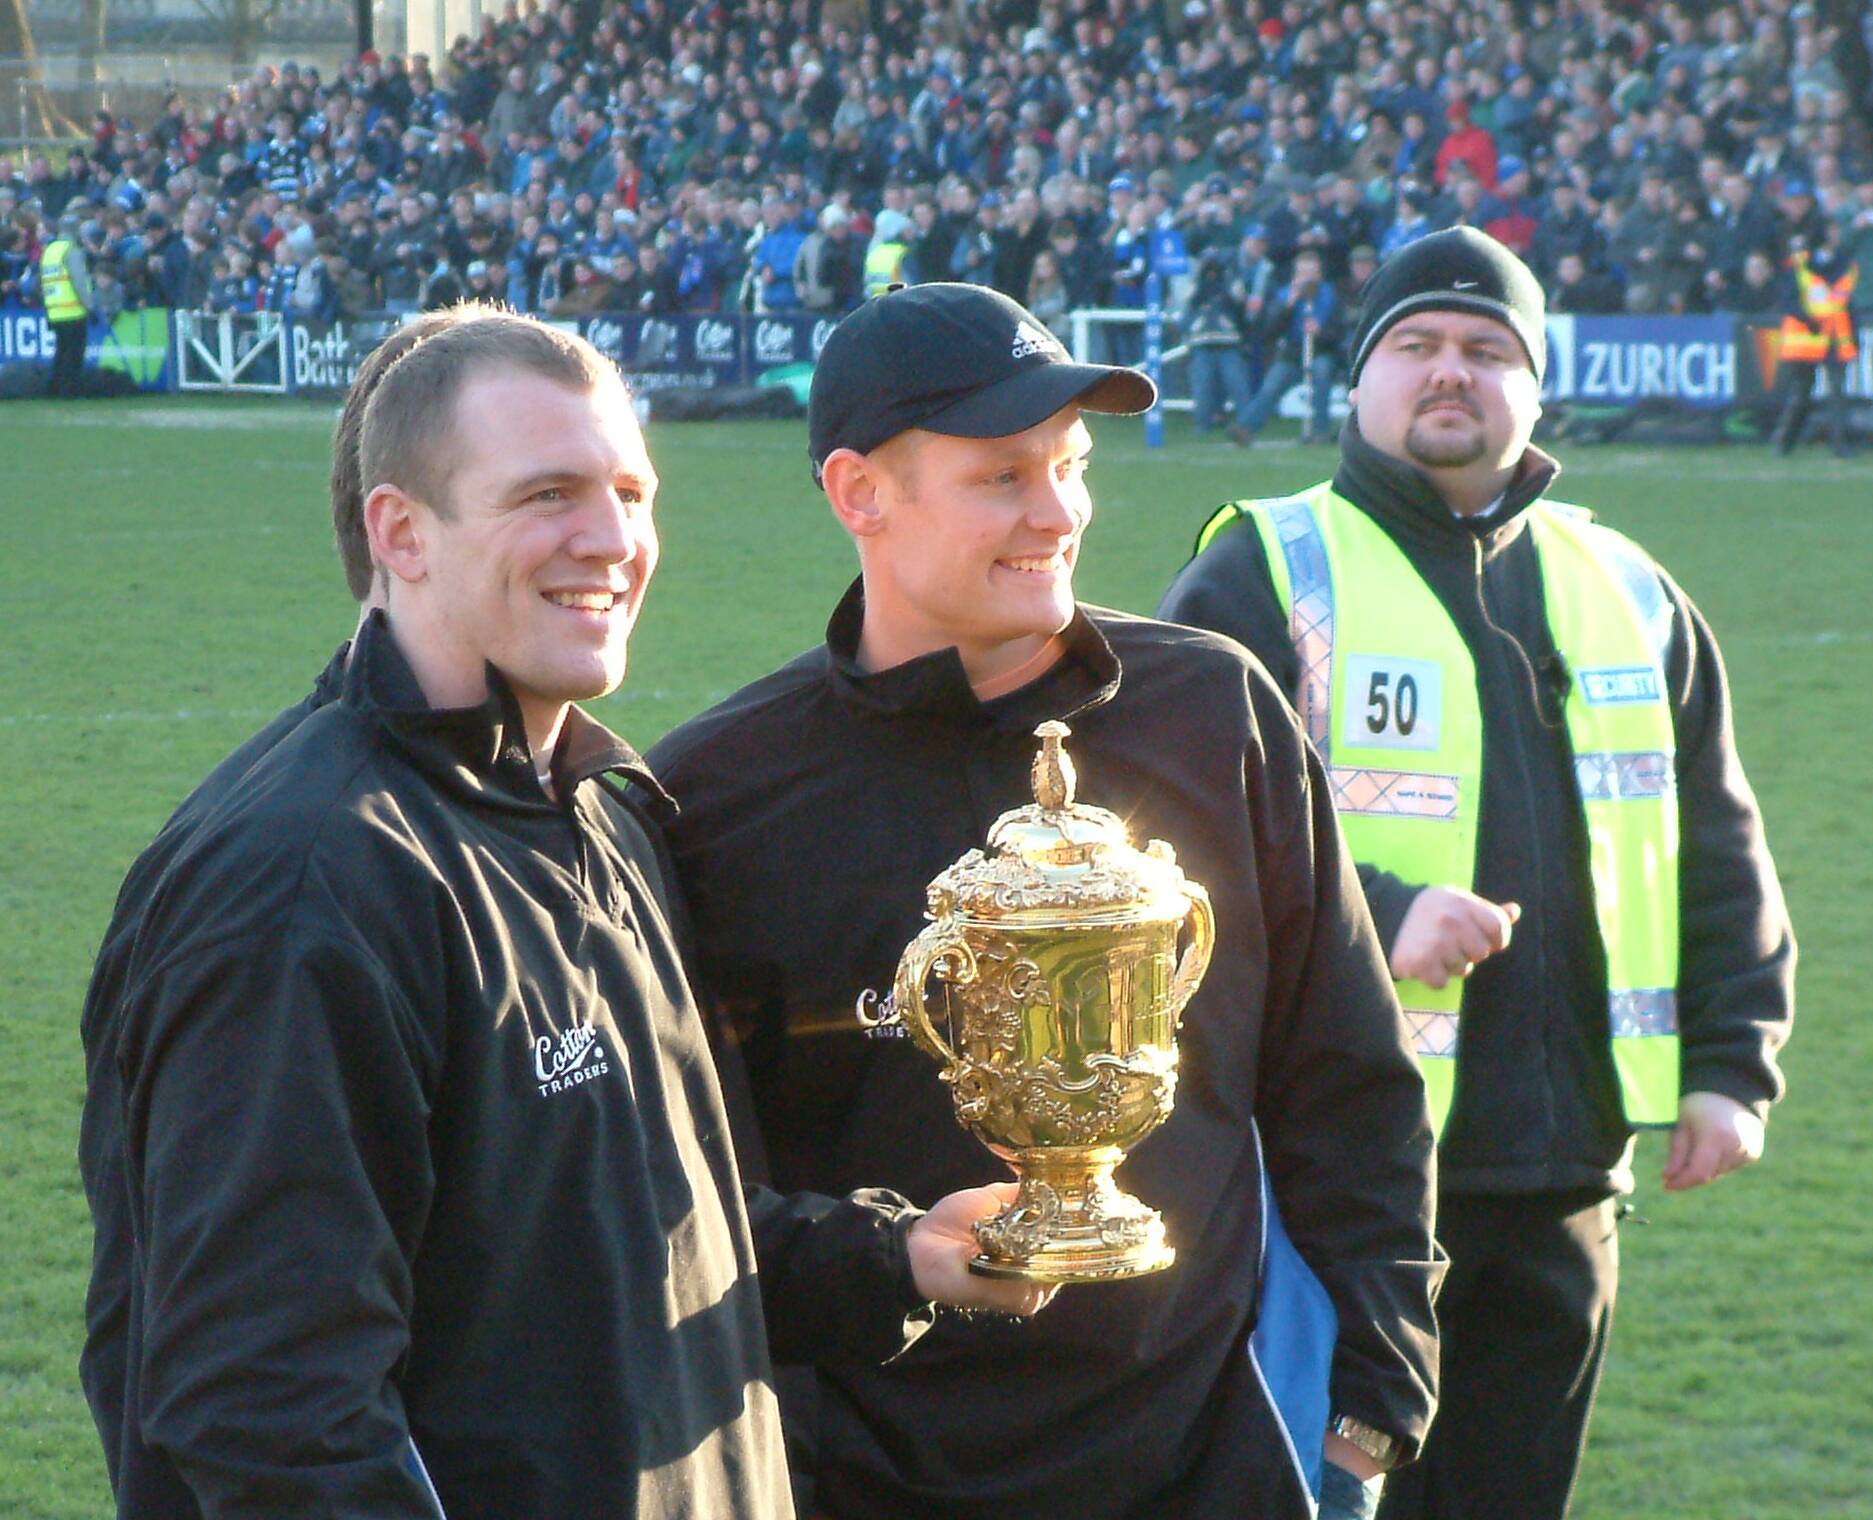 a group of people holding a trophy while standing on a field